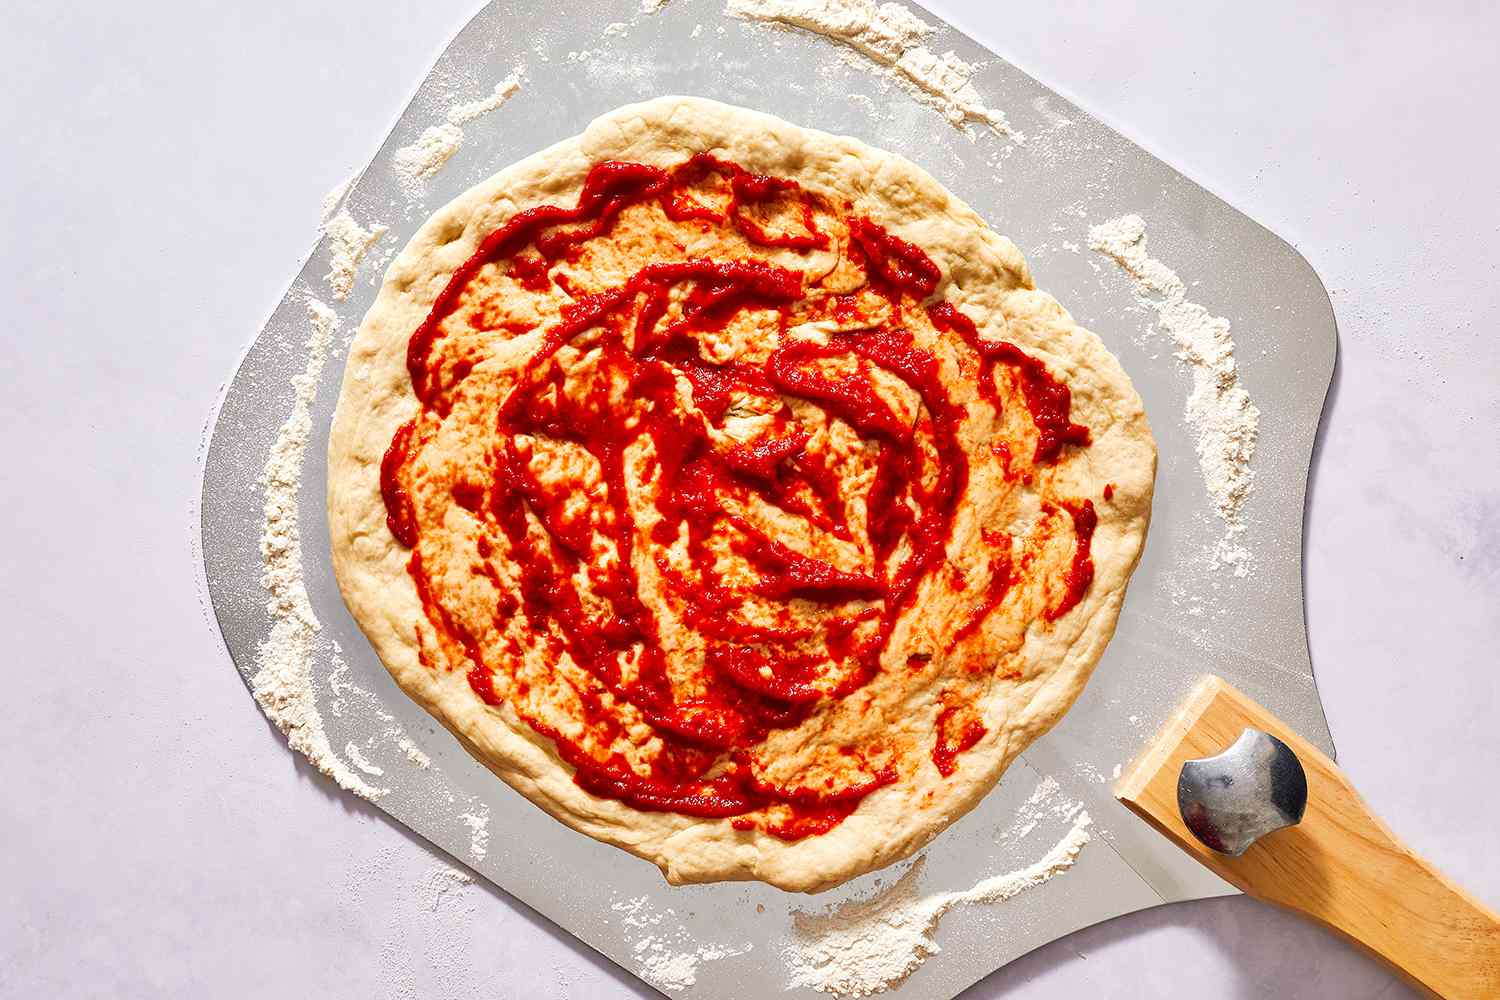 Pizza dough with tomato sauce spread to the edge, and set on a pizza peel